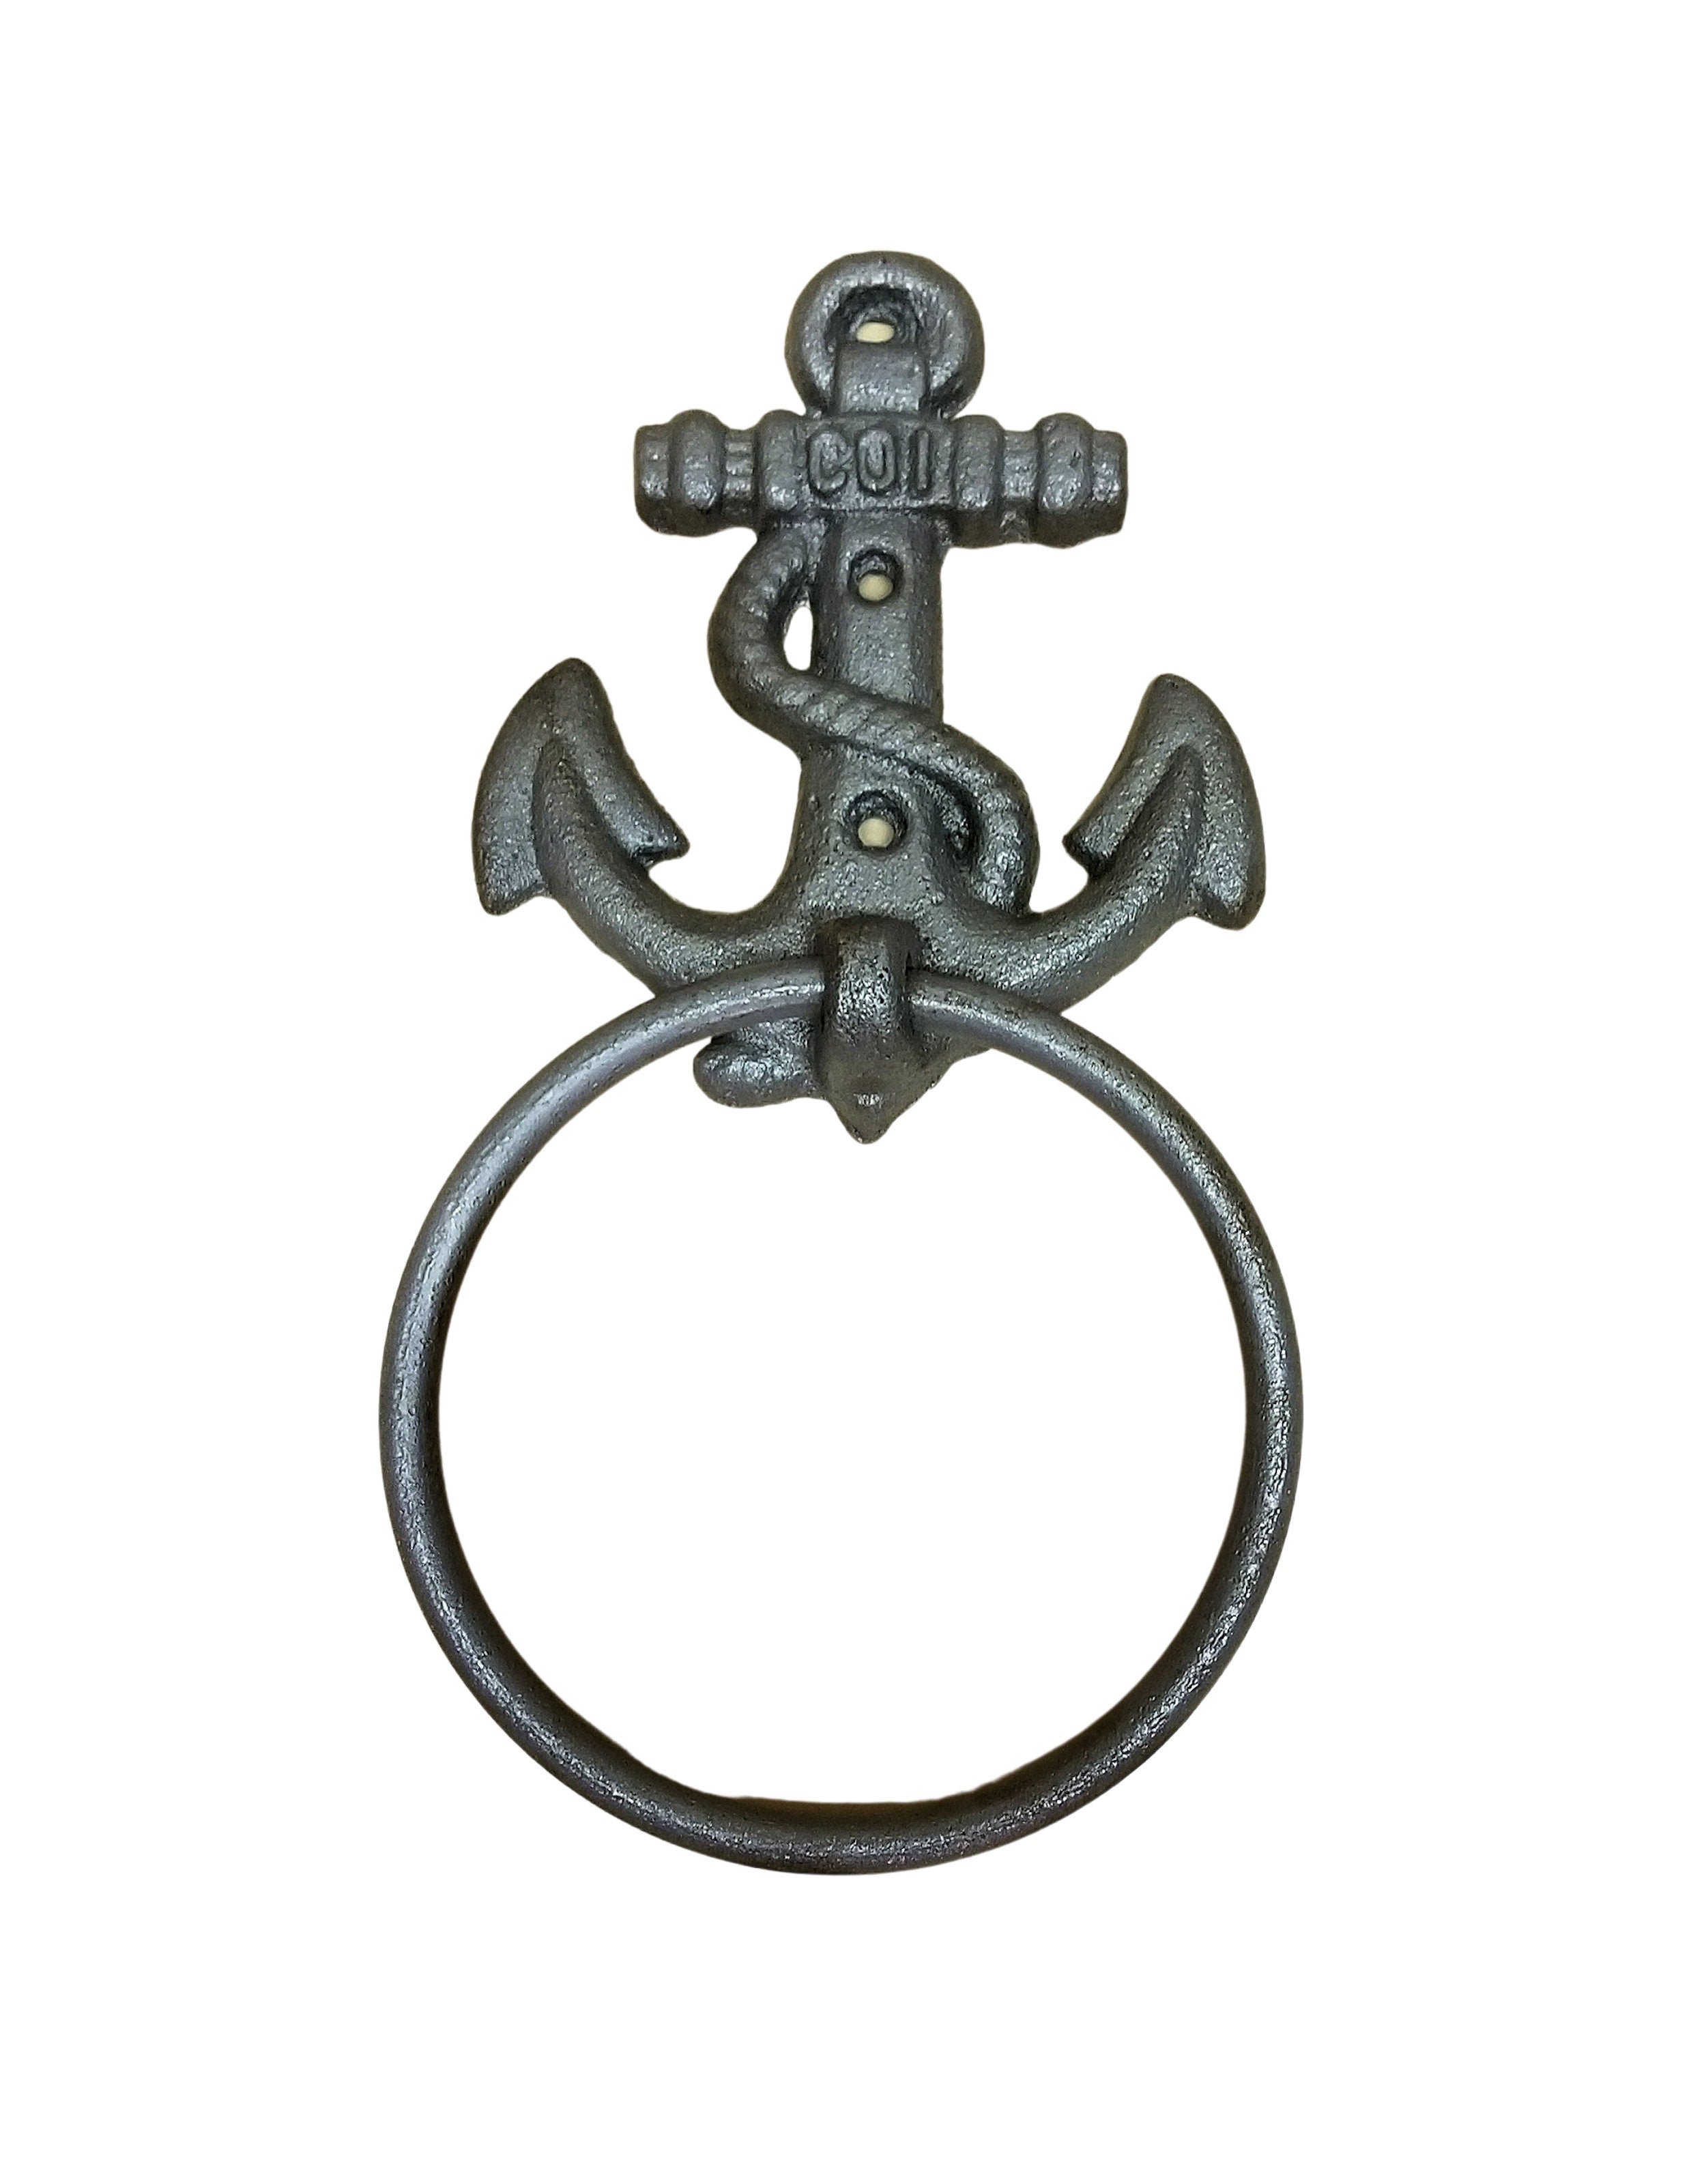 Cast Iron Anchor Towel Ring 4" Rustic Brown Wall Mount Nautical Decor bathroom accessory Carvers Olde Iron 